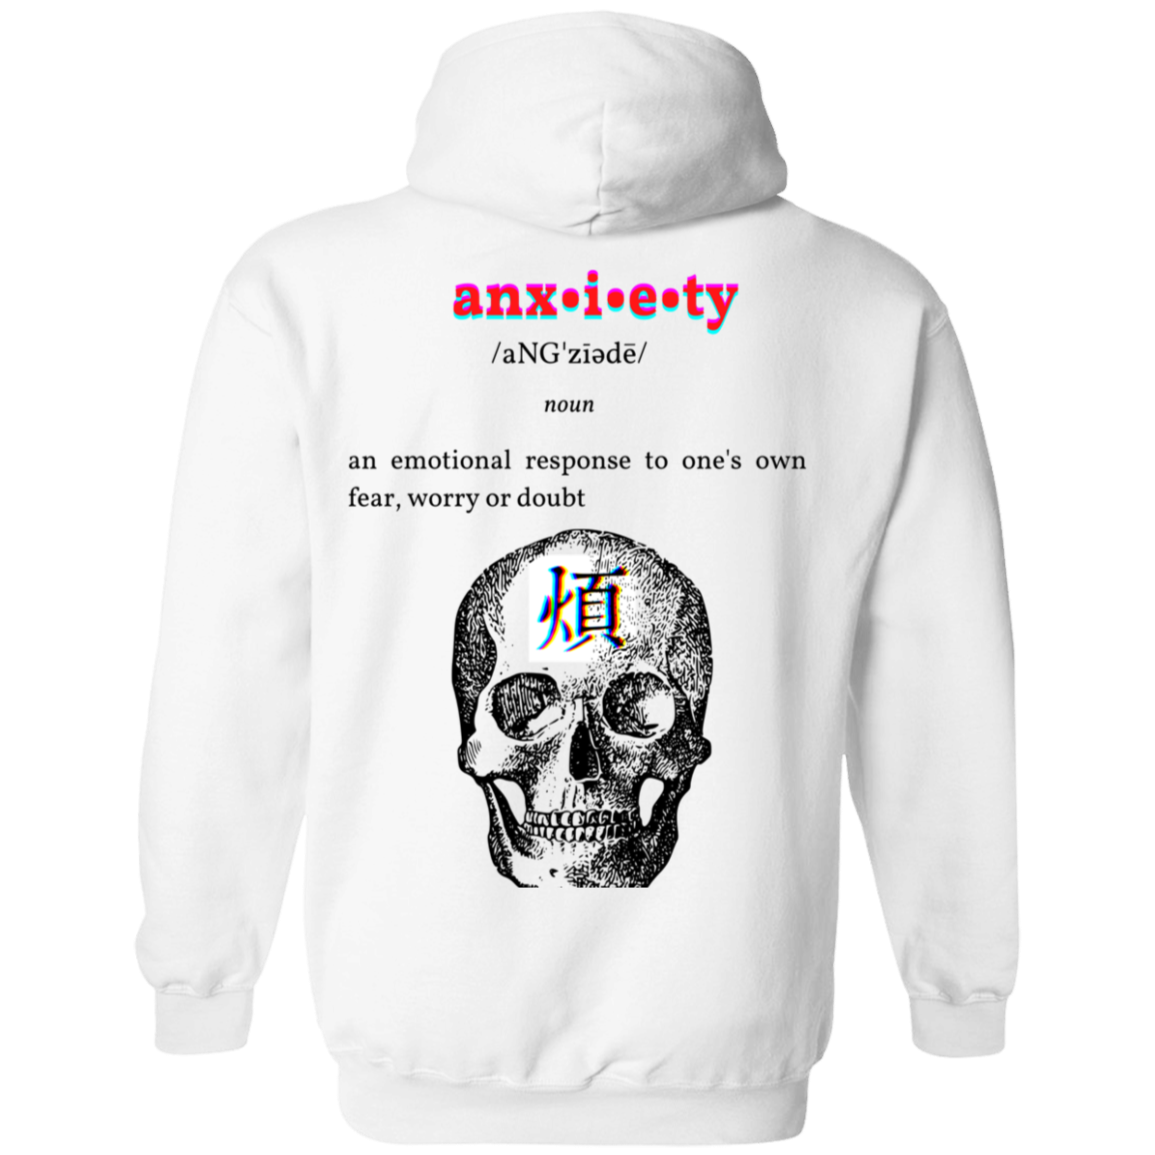 (back) the text, from top to bottom reads: anx•i•e•ty /aNG'ziadè/ noun an emotional response to one's own fear, worry or doubt. below the text, there's a skull with the kanji for anxiety in japanese in the center of it.